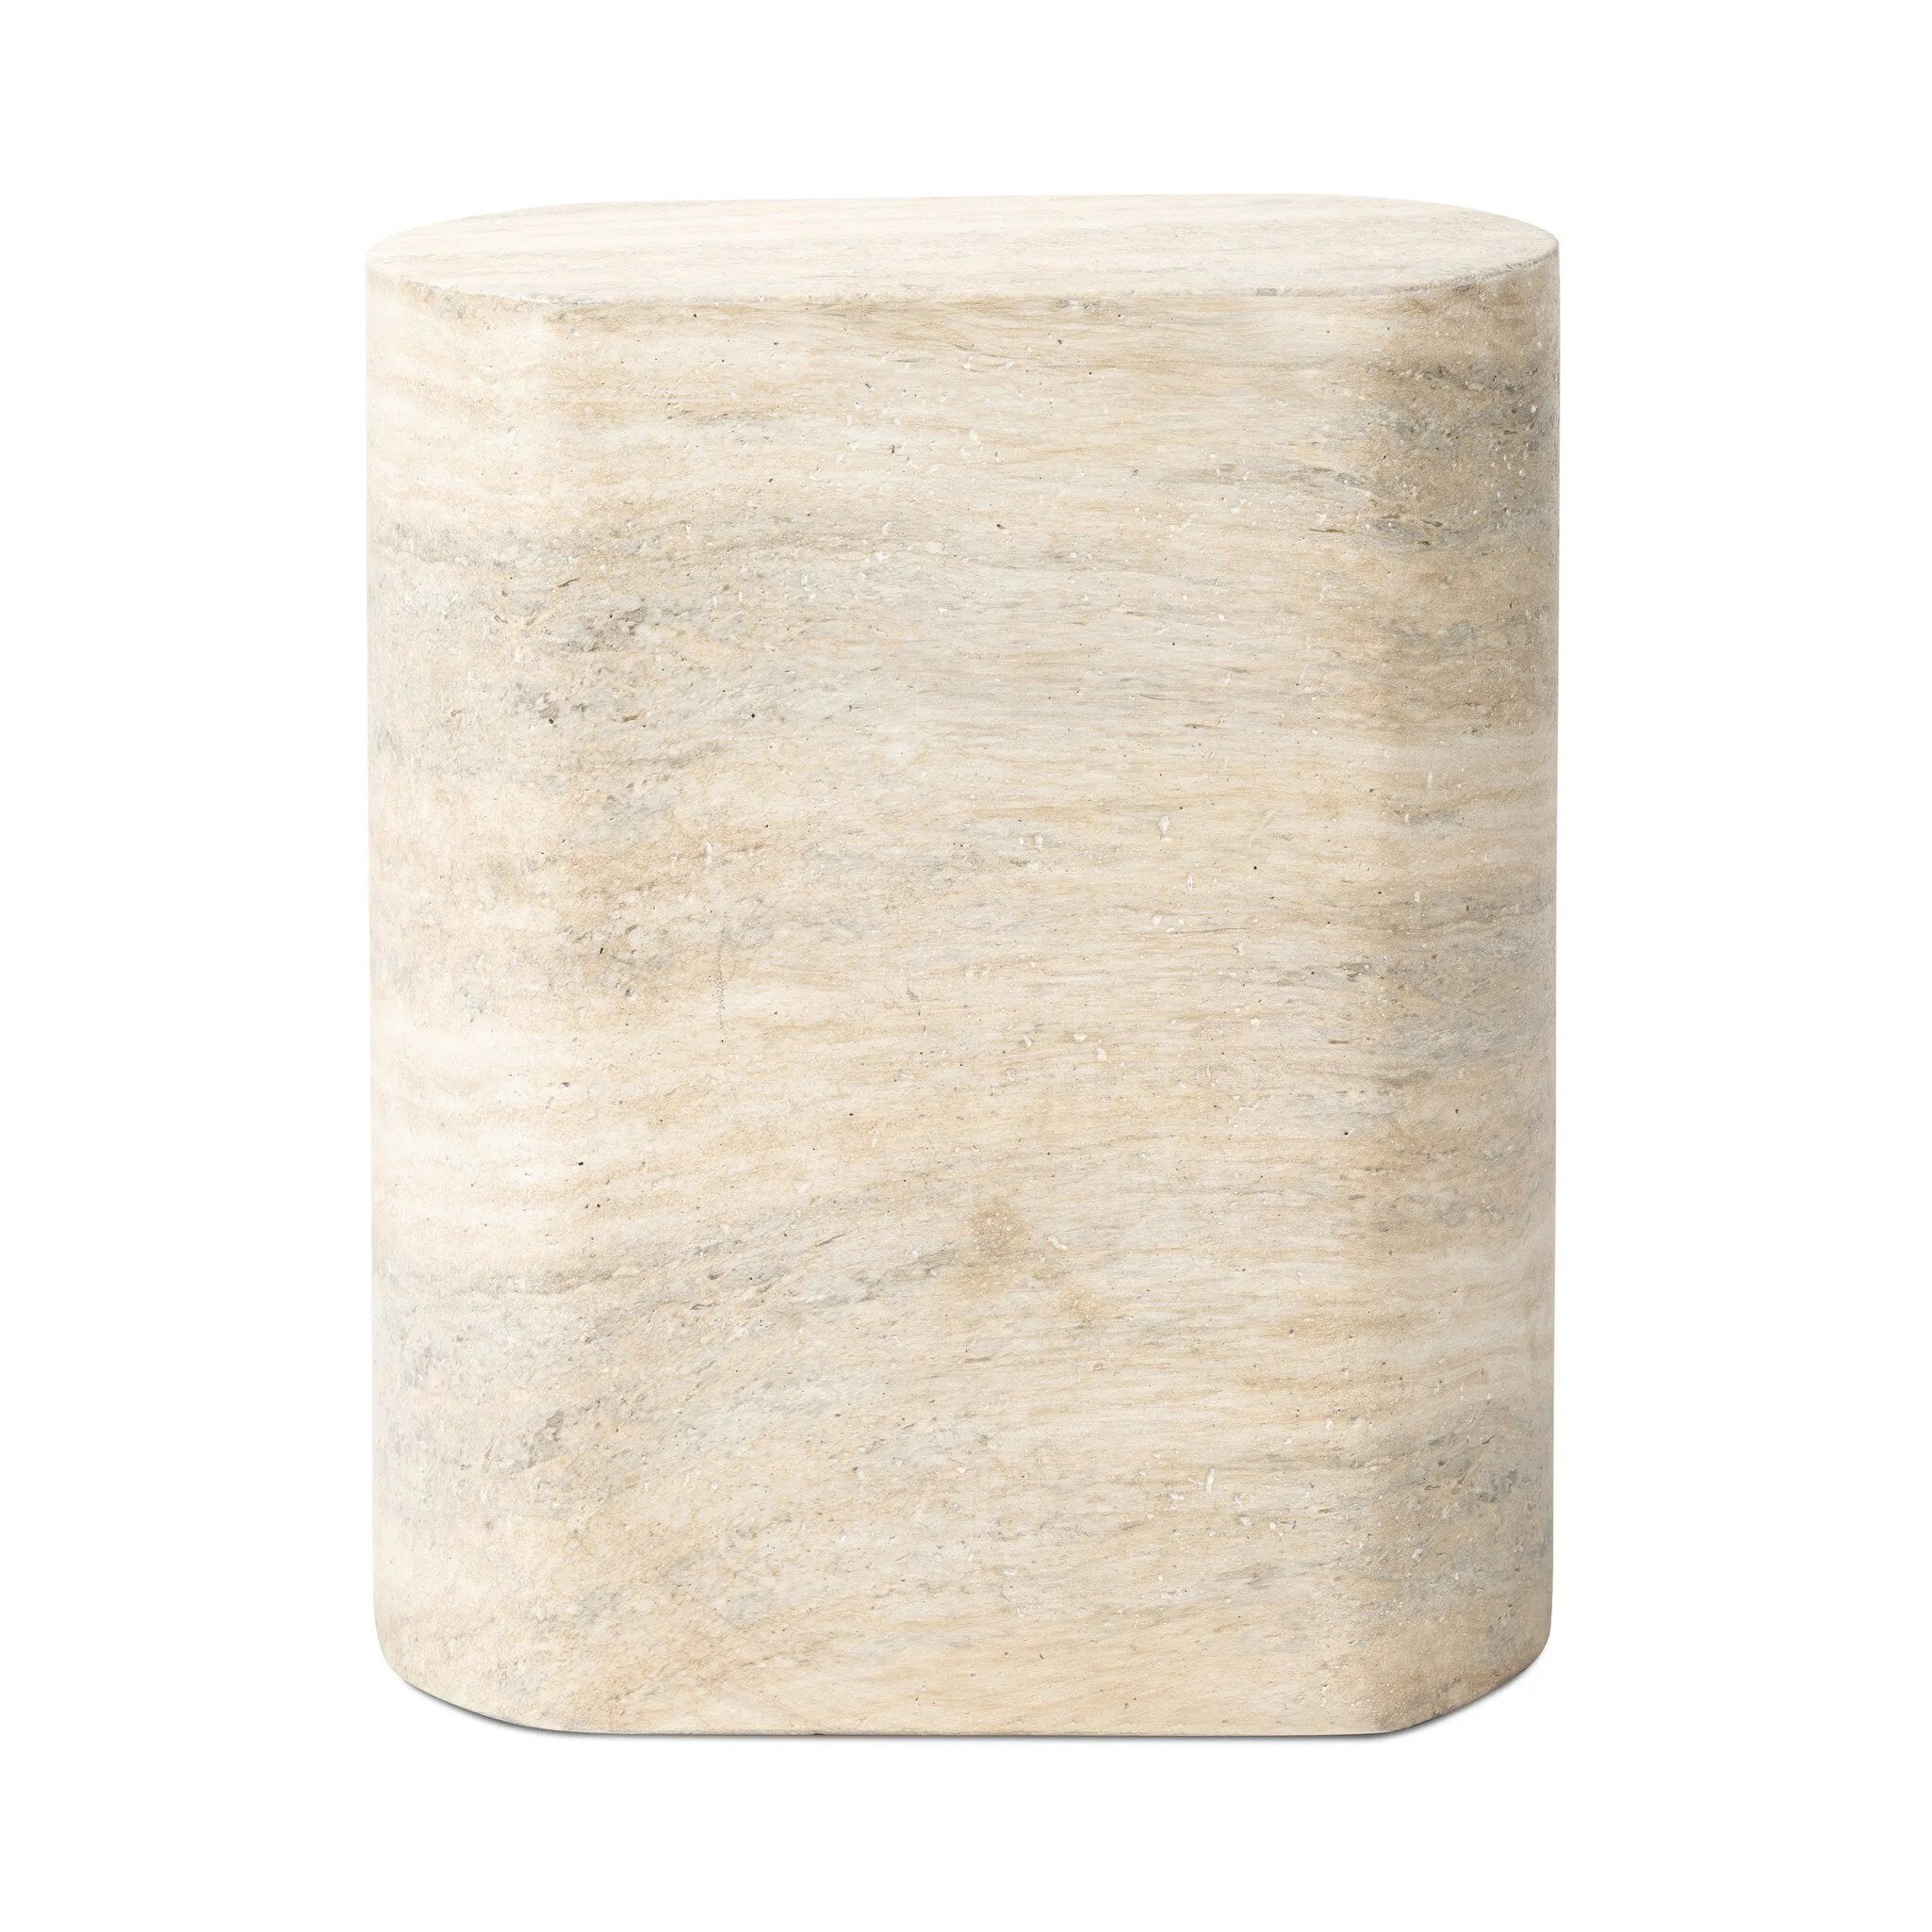 Cutout detailing brings a clean, modern vibe to a versatile end table of cast concrete. A water transfer finish creates a textured look and sandy hue resembling natural travertine.Collection: Chandle Amethyst Home provides interior design, new home construction design consulting, vintage area rugs, and lighting in the Portland metro area.